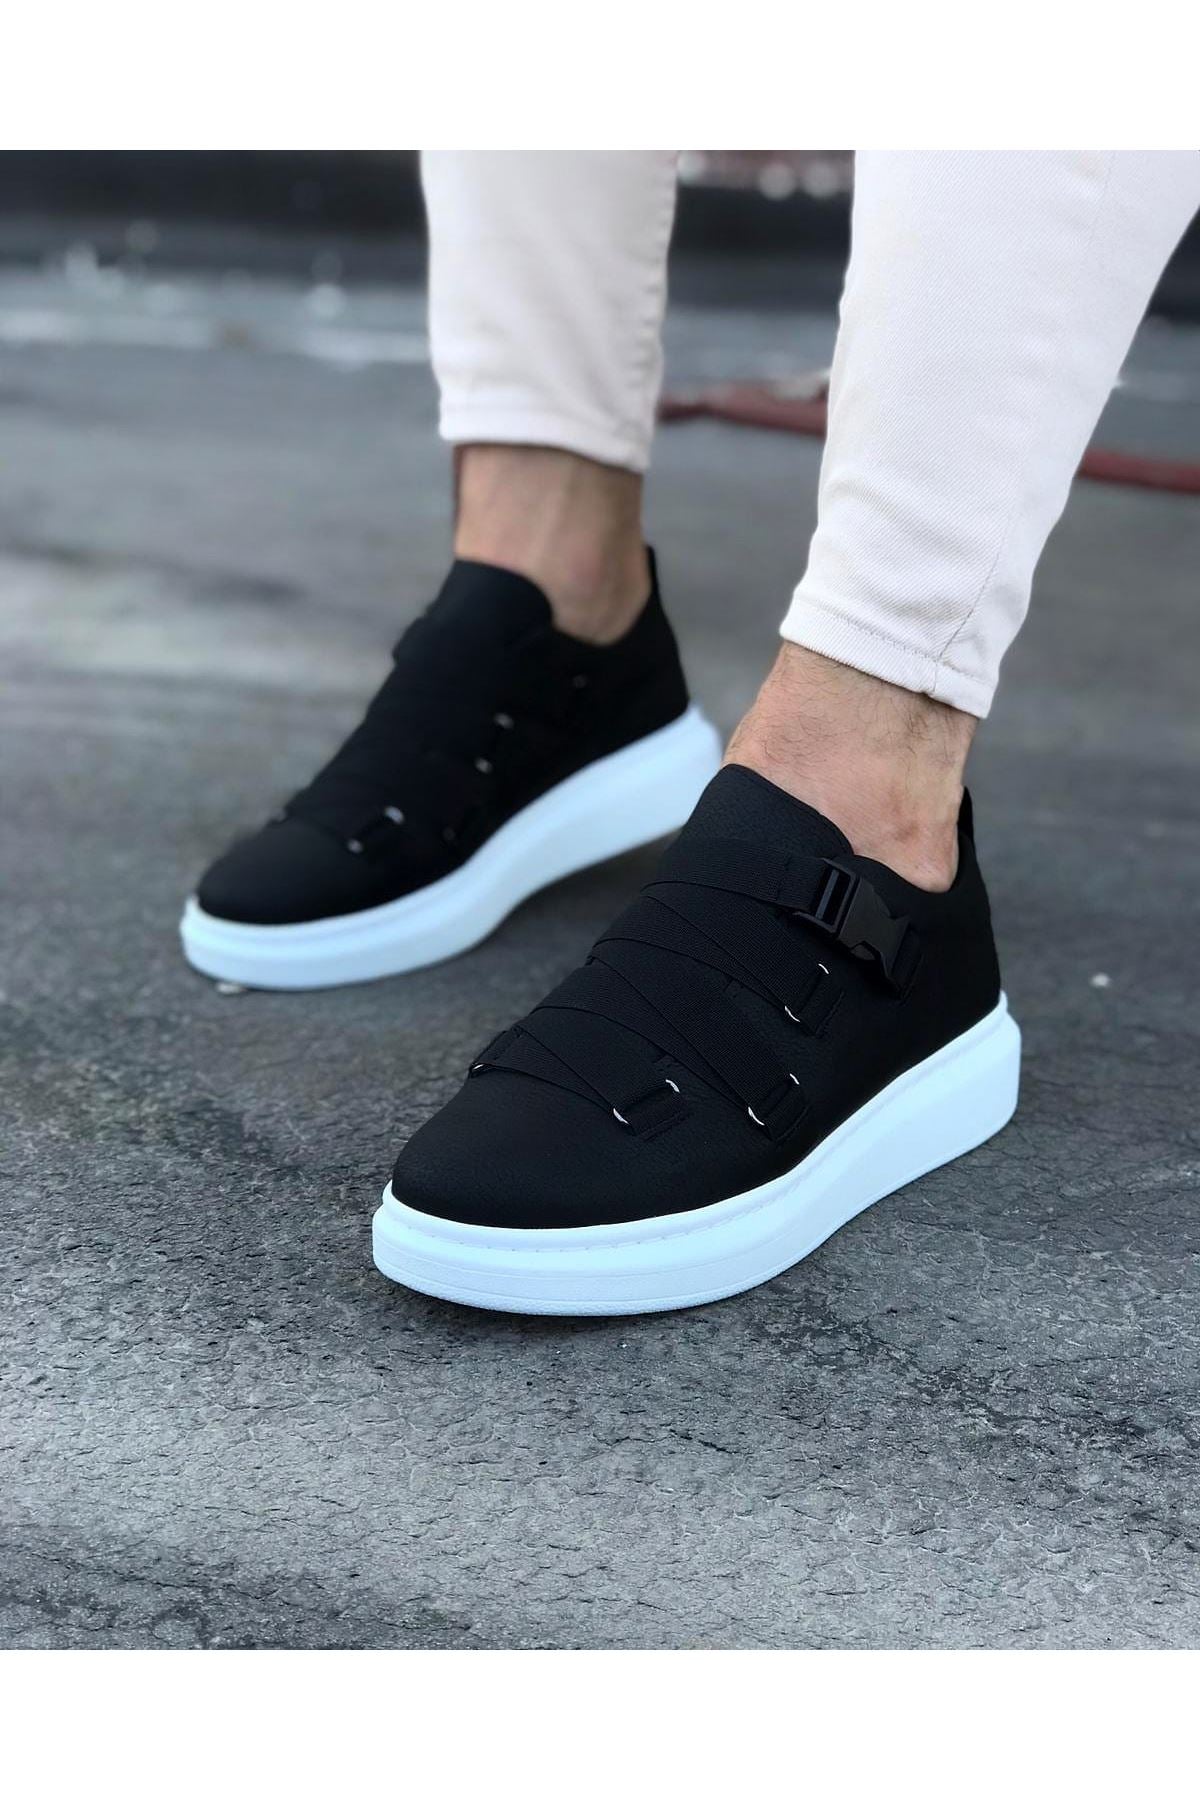 WG033  Black Men's High-Sole Shoes sneakers - STREETMODE ™